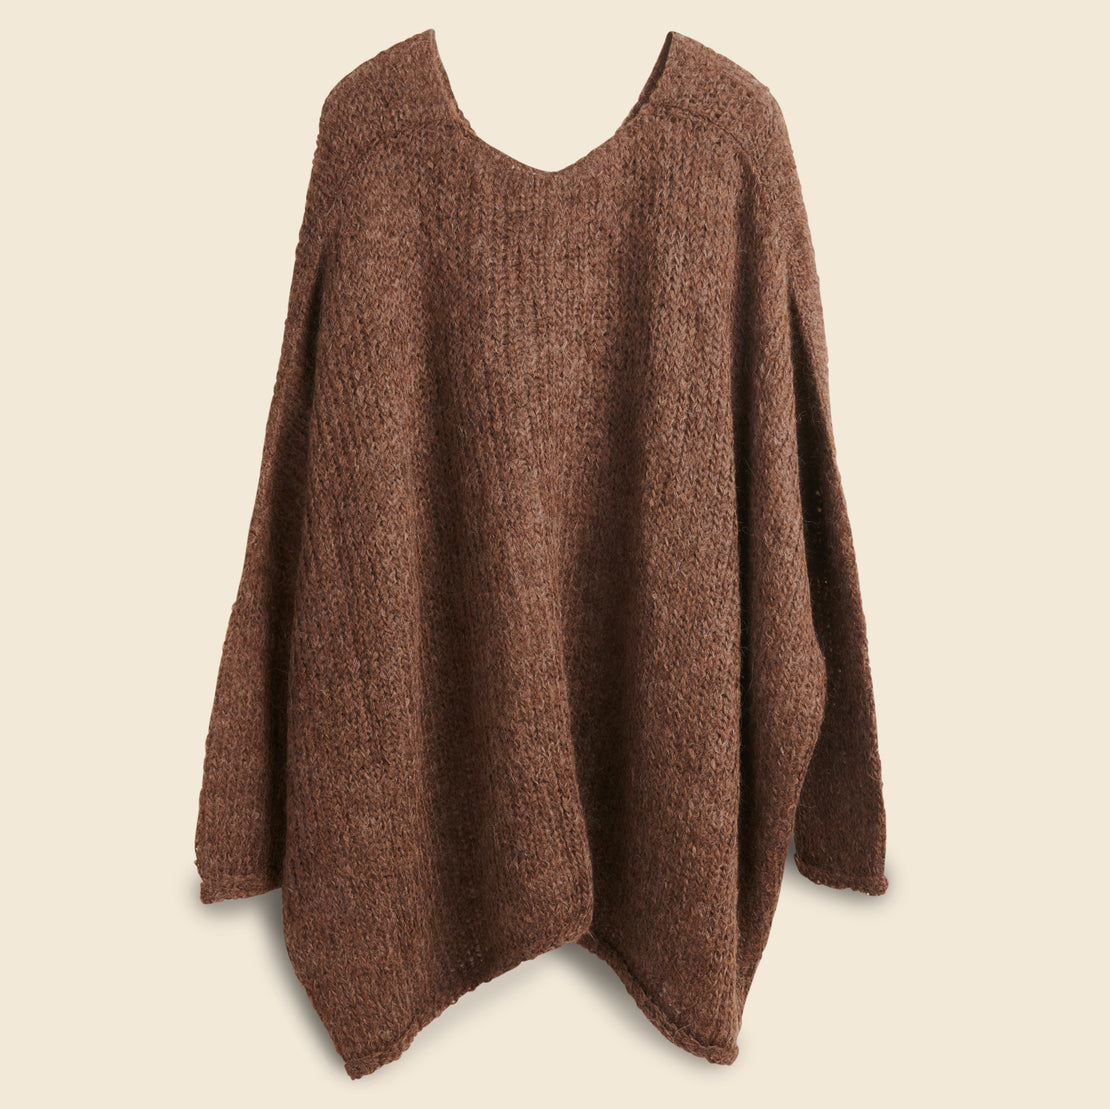 Ren Top - Brown - Atelier Delphine - STAG Provisions - W - Tops - Sweater